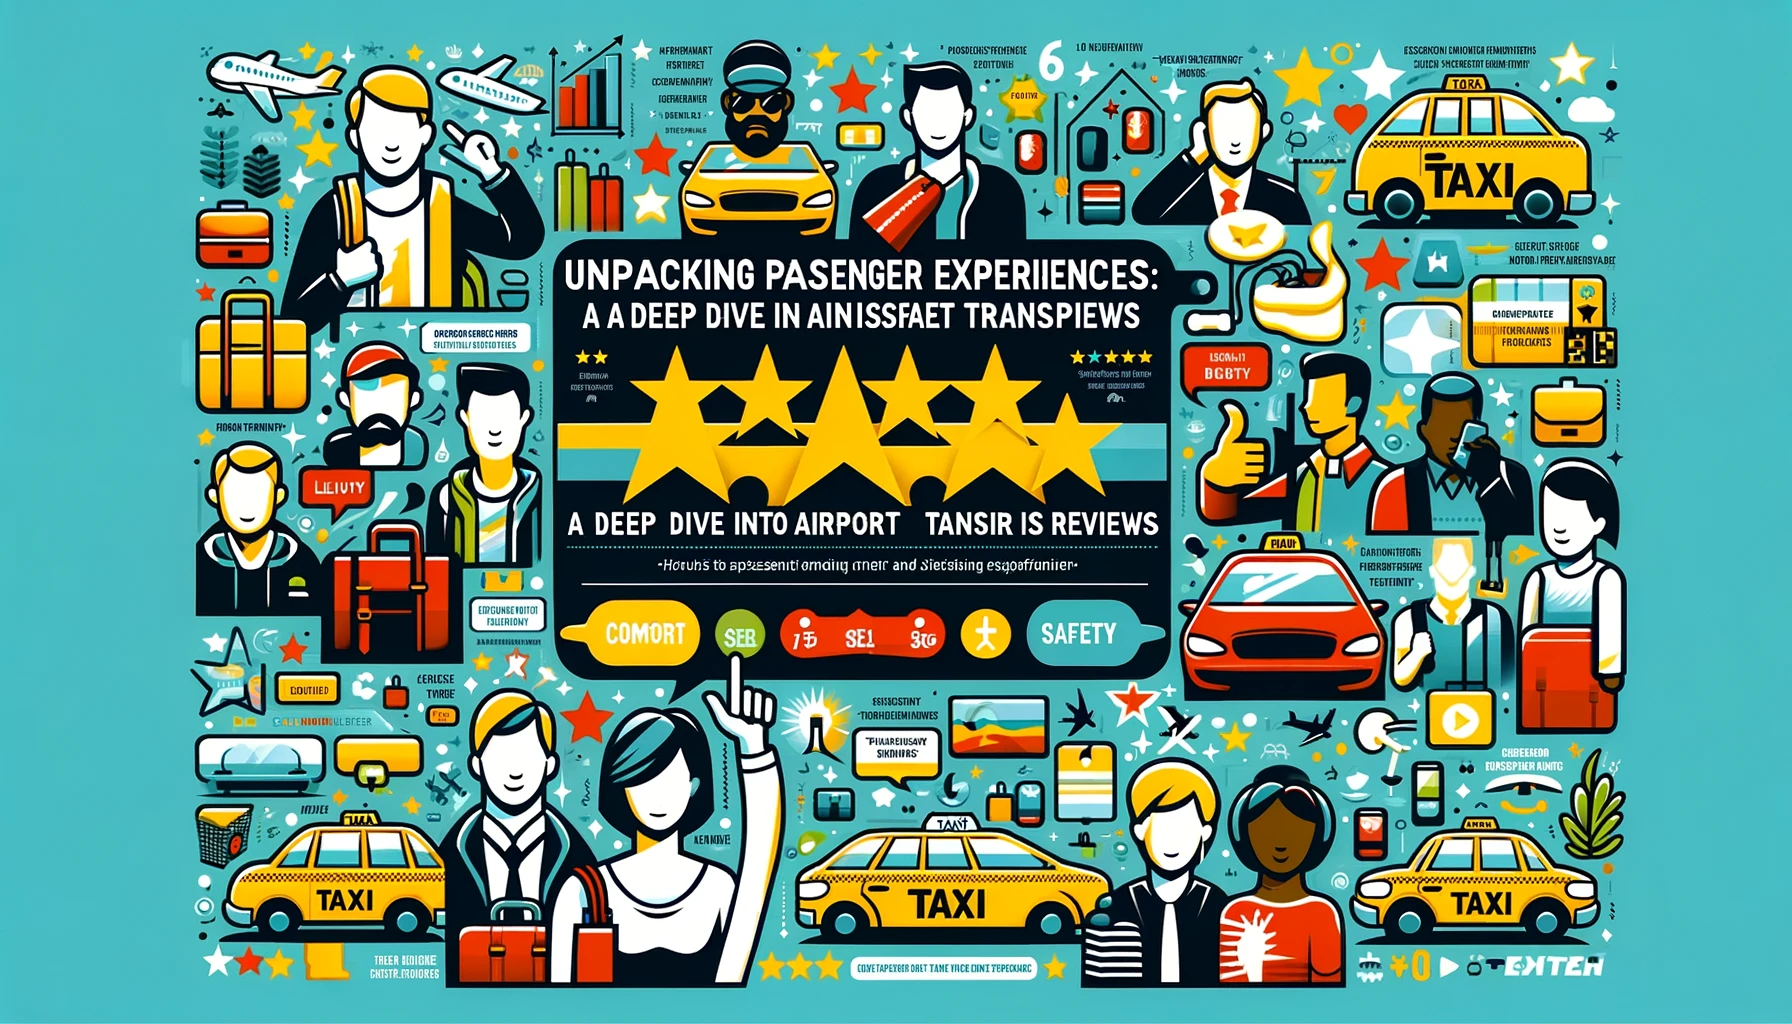 Unpacking Passenger Experiences: A Deep Dive into Airport Taxi Transfers Reviews